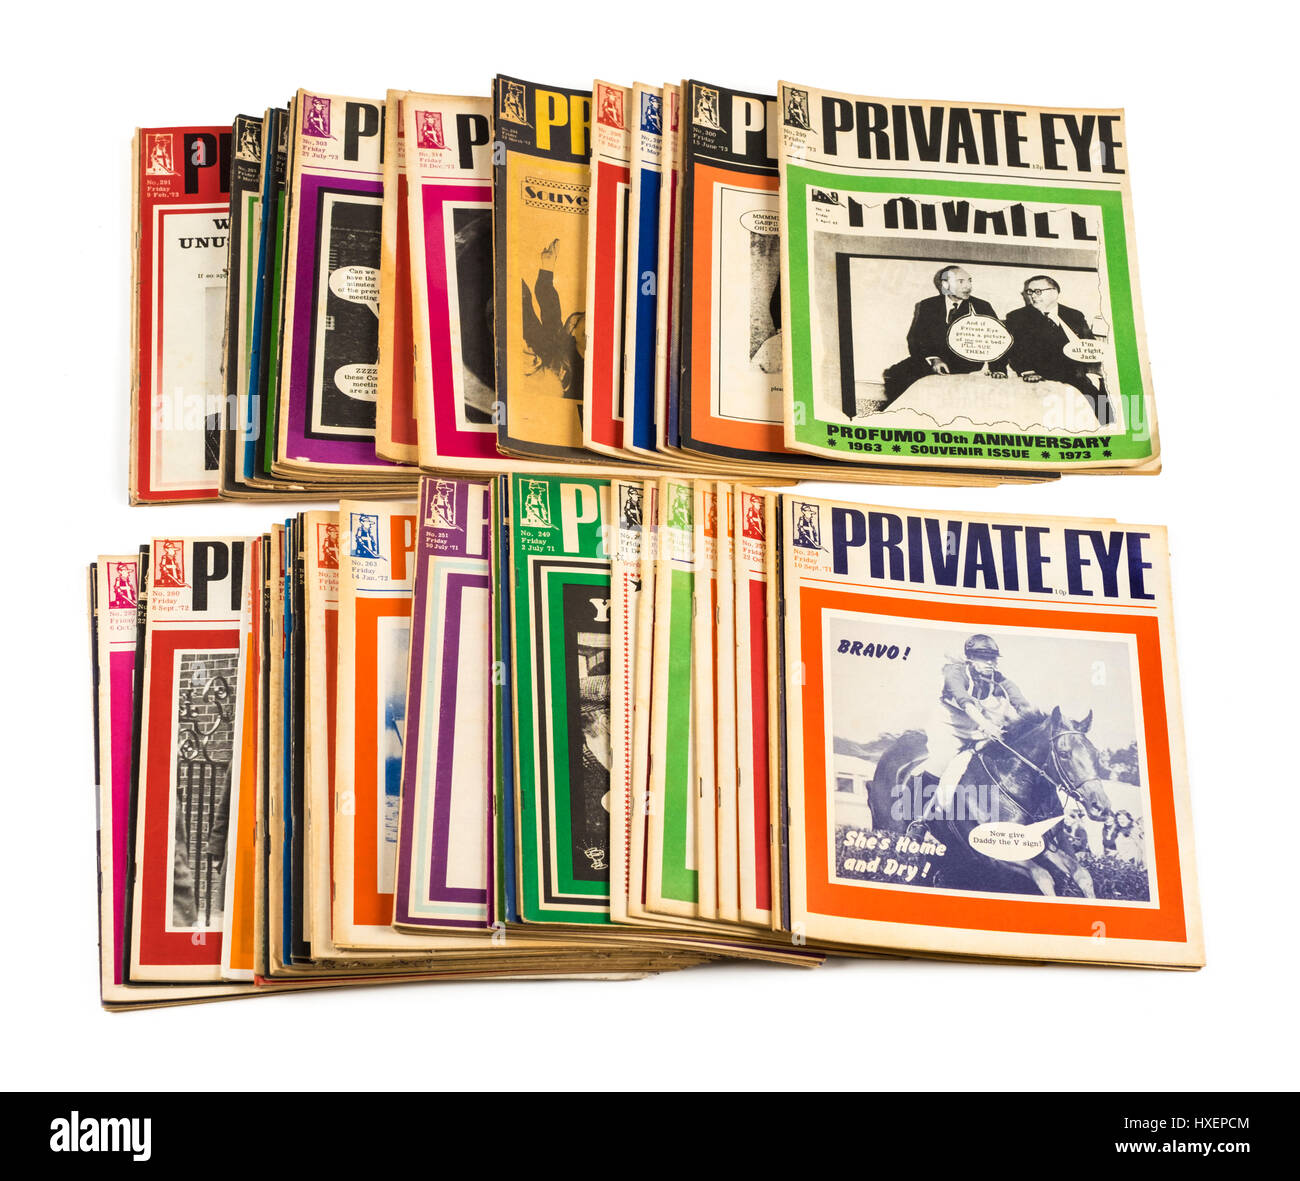 Large collection of vintage 1970s issues of Private Eye magazine, the popular satirical / humorous publication famous for lampooning of politicians. Stock Photo